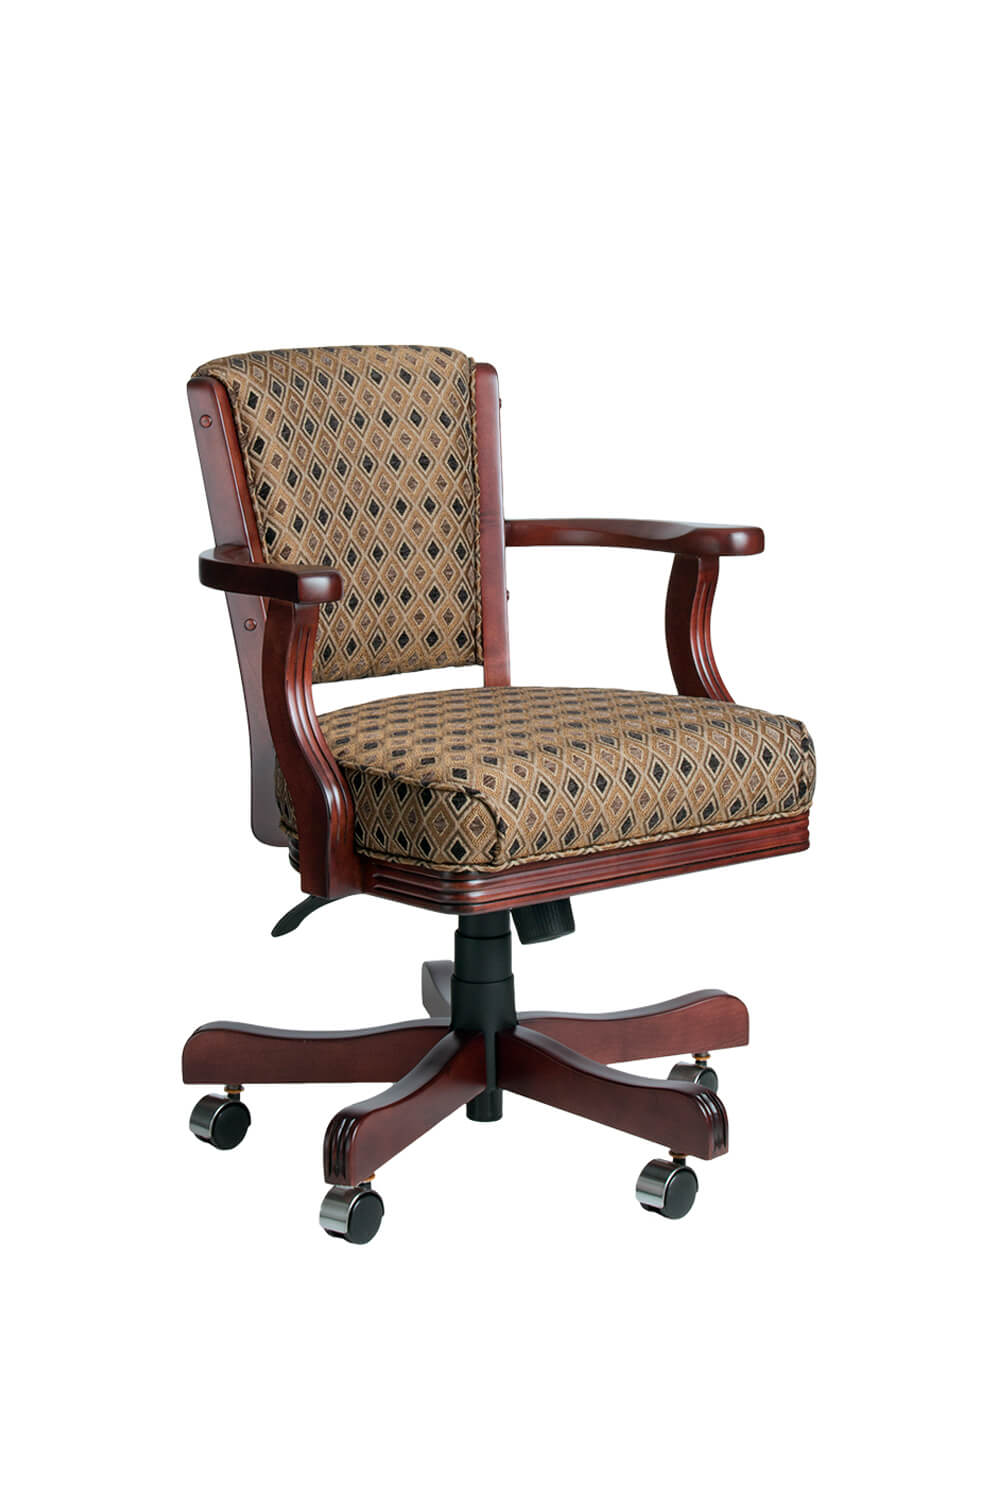 960 Maple Wood Upholstered Arm Game Chair with Casters